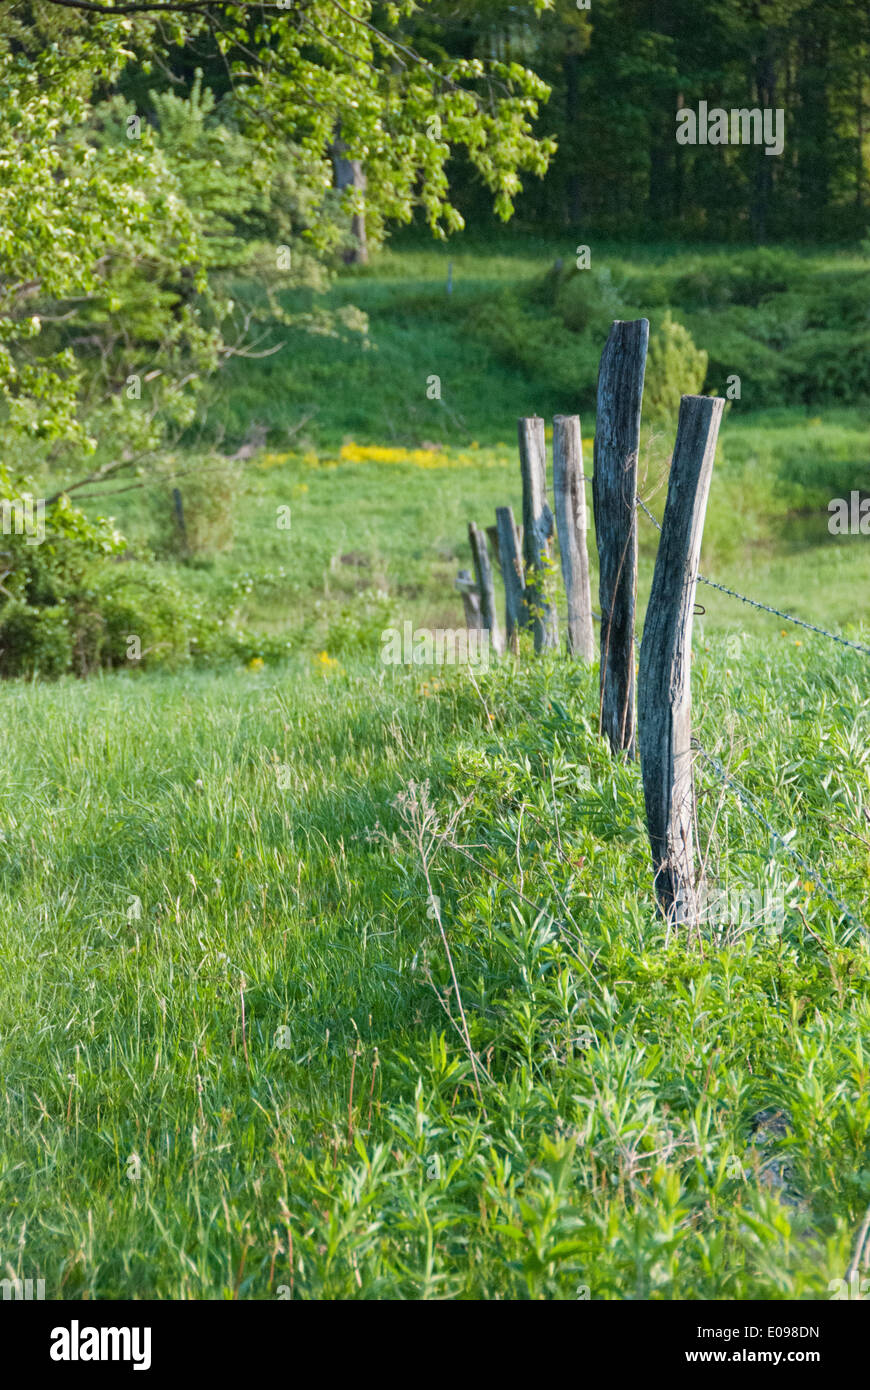 Rolling Pasture with Country Fence Stock Photo